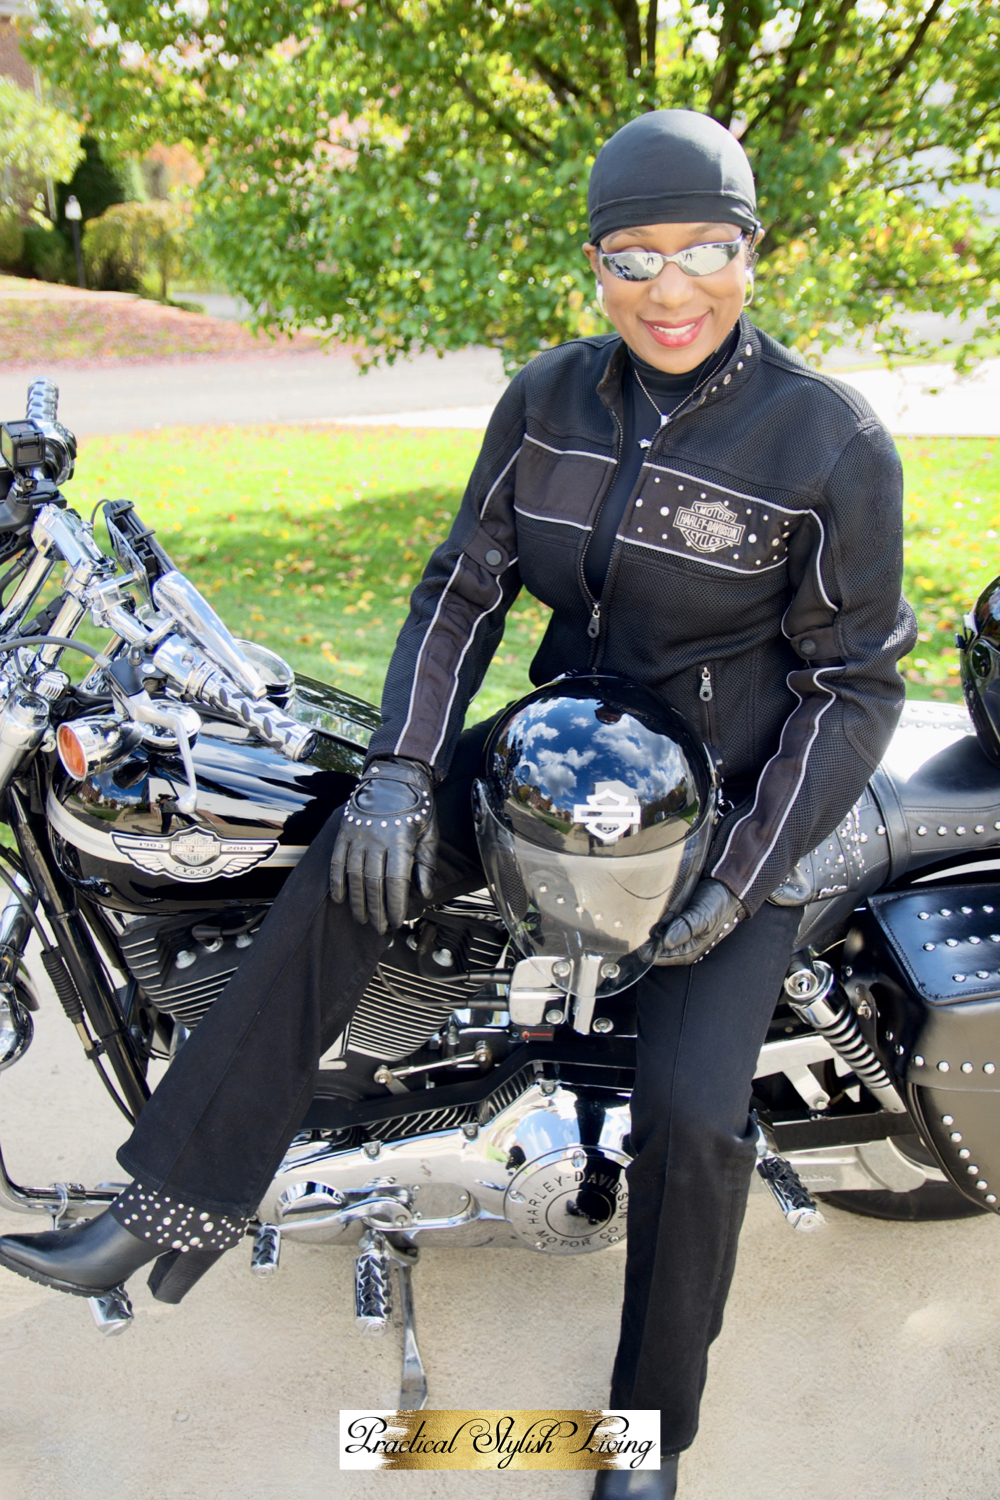 Kimberly R Jones sitting on her Harley-Davidson motorcycle with black riding boots on. Black woman motorcycle rider.